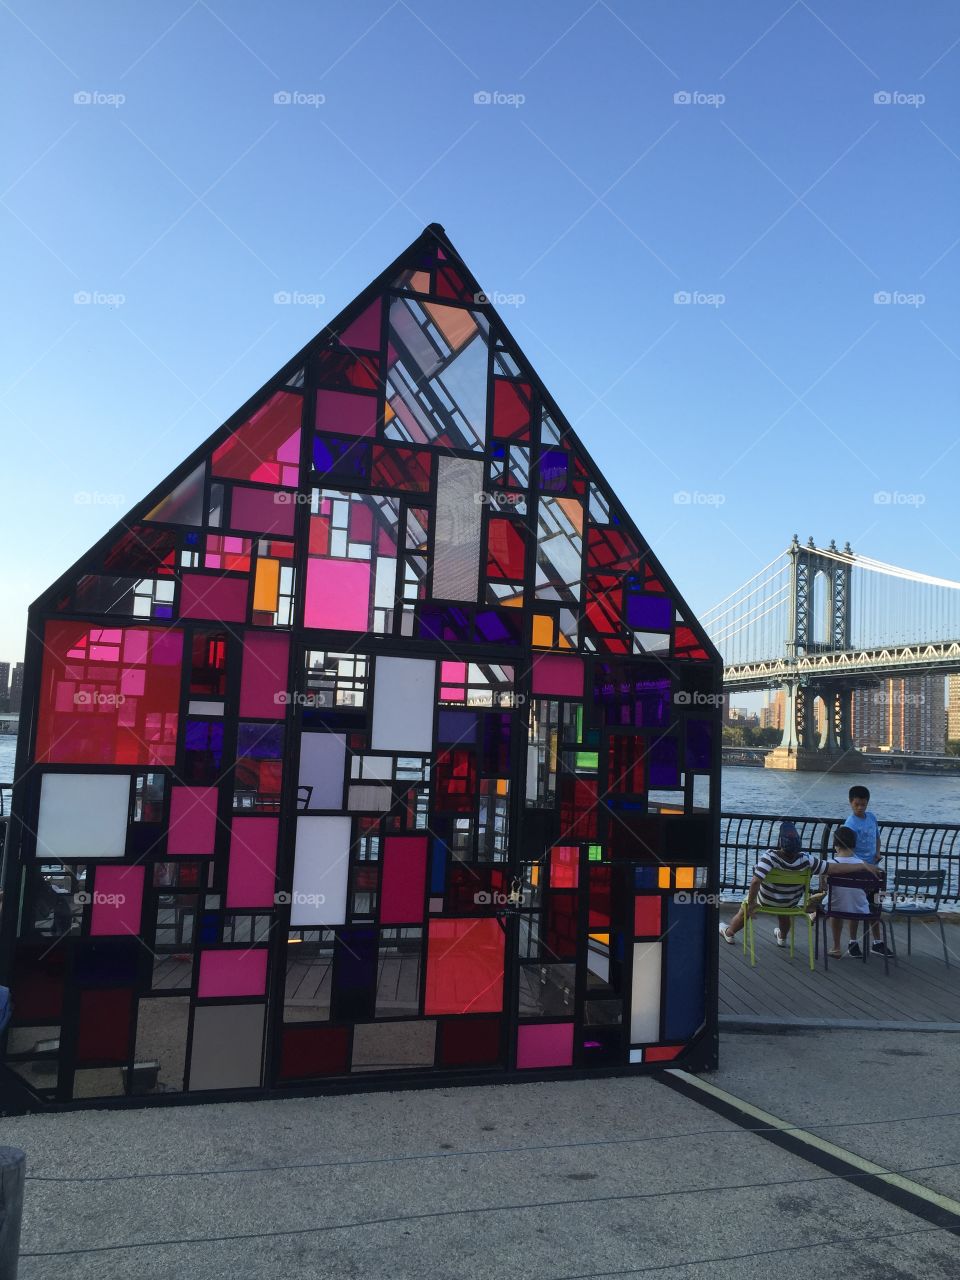 Stained Glass House. Tom Fruin's Stain Glass House @ the Brooklyn Bridge Park